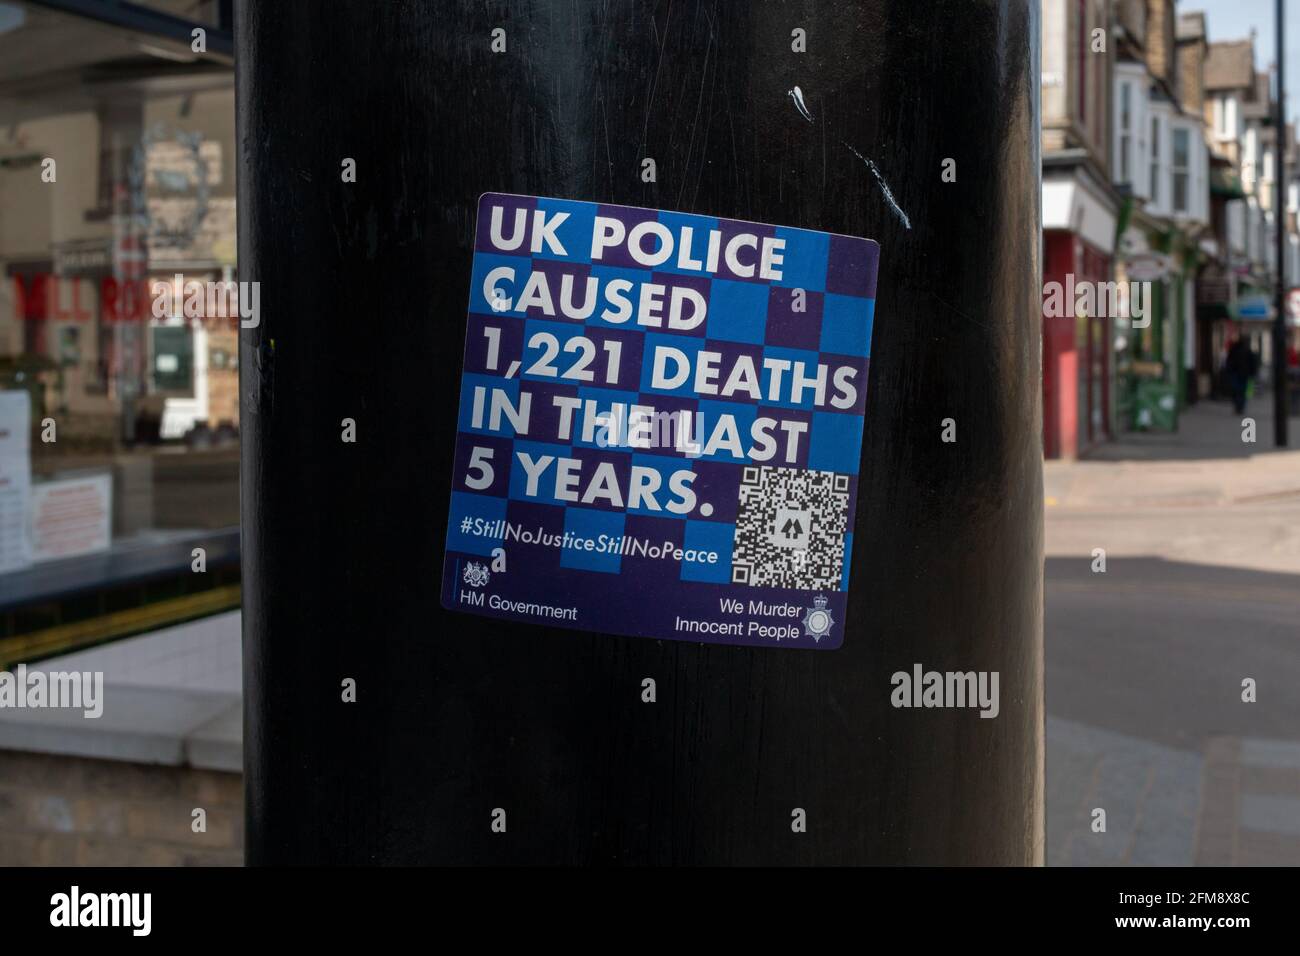 A blue anti-police sticker claiming the UK police caused 1221 deaths in the last five years. Stock Photo